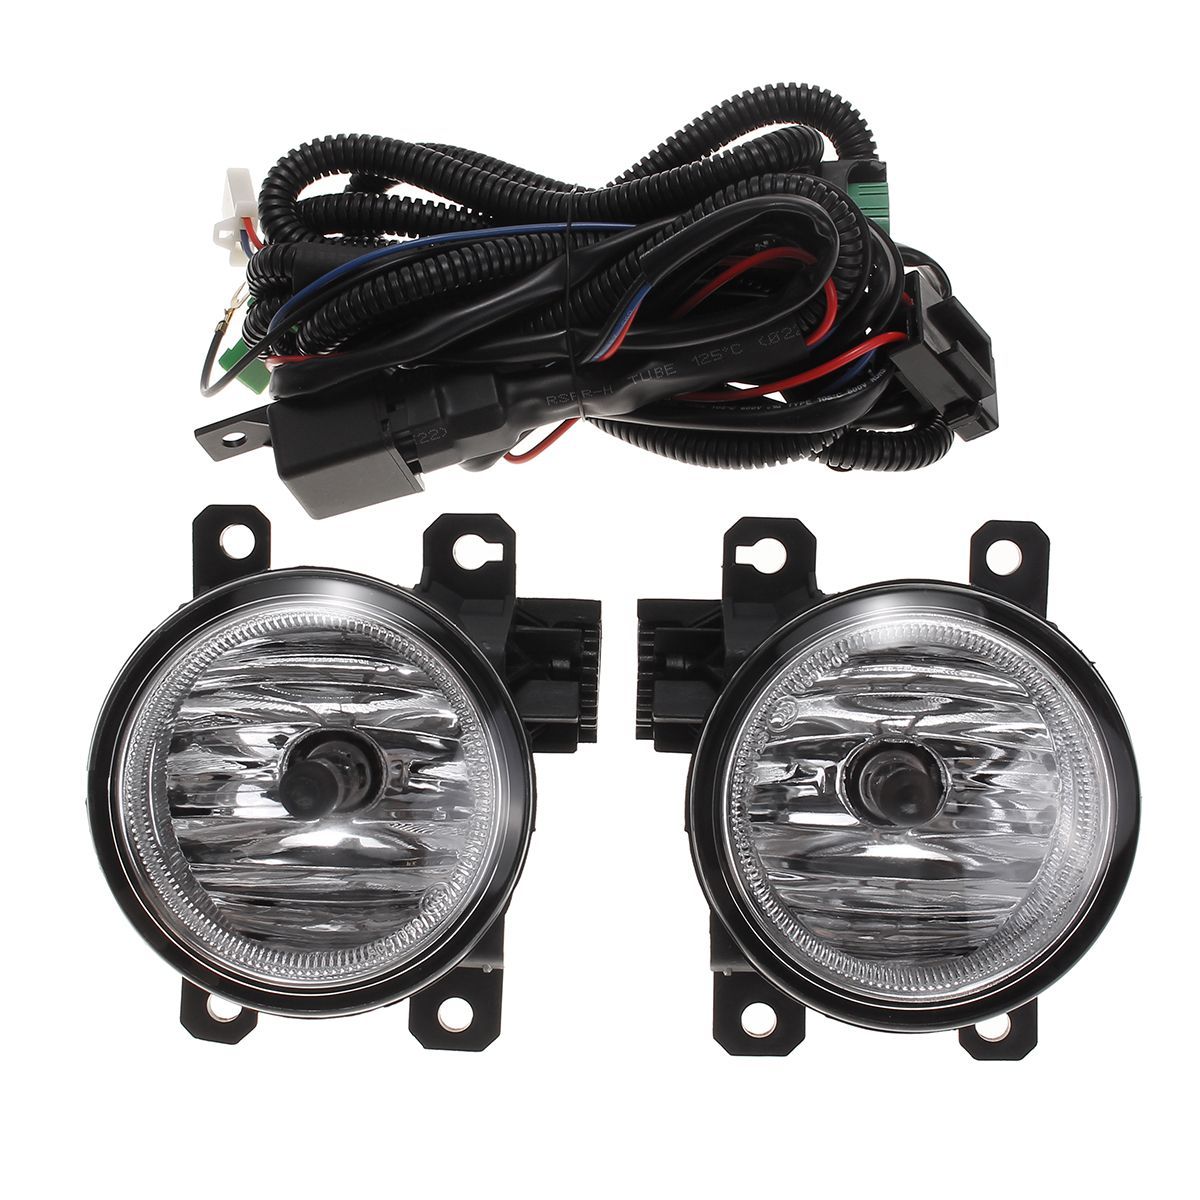 Car-Front-Bumper-Fog-Lights-Lamp-Set-with-Wiring-Switch-Relay-for-Honda-Civic-2019-2020-1598466